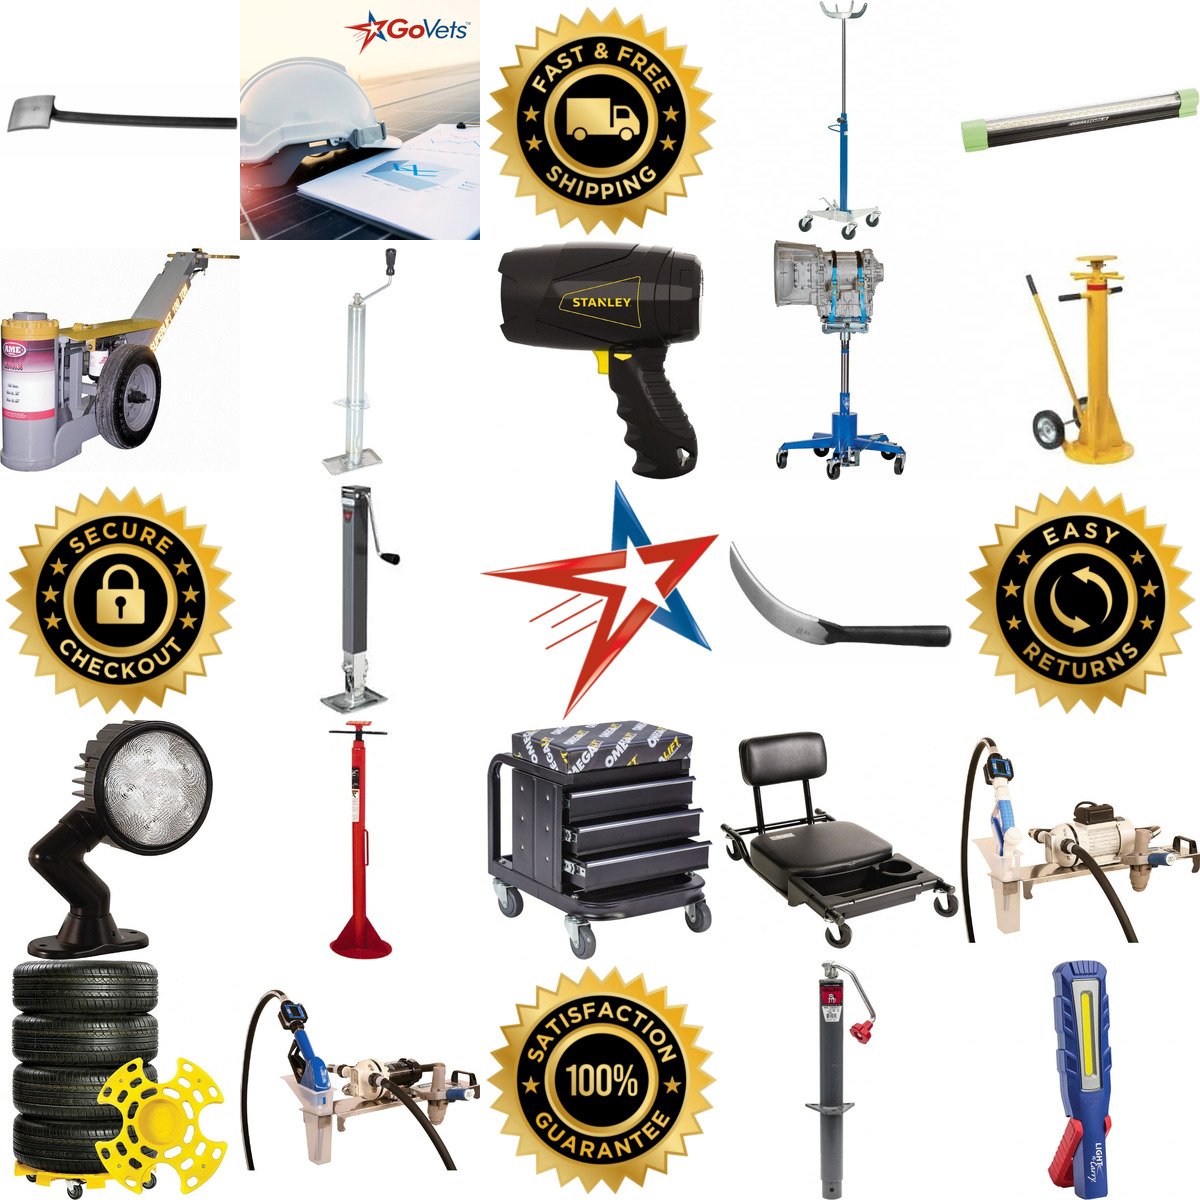 A selection of Garage Equipment and Lifting products on GoVets